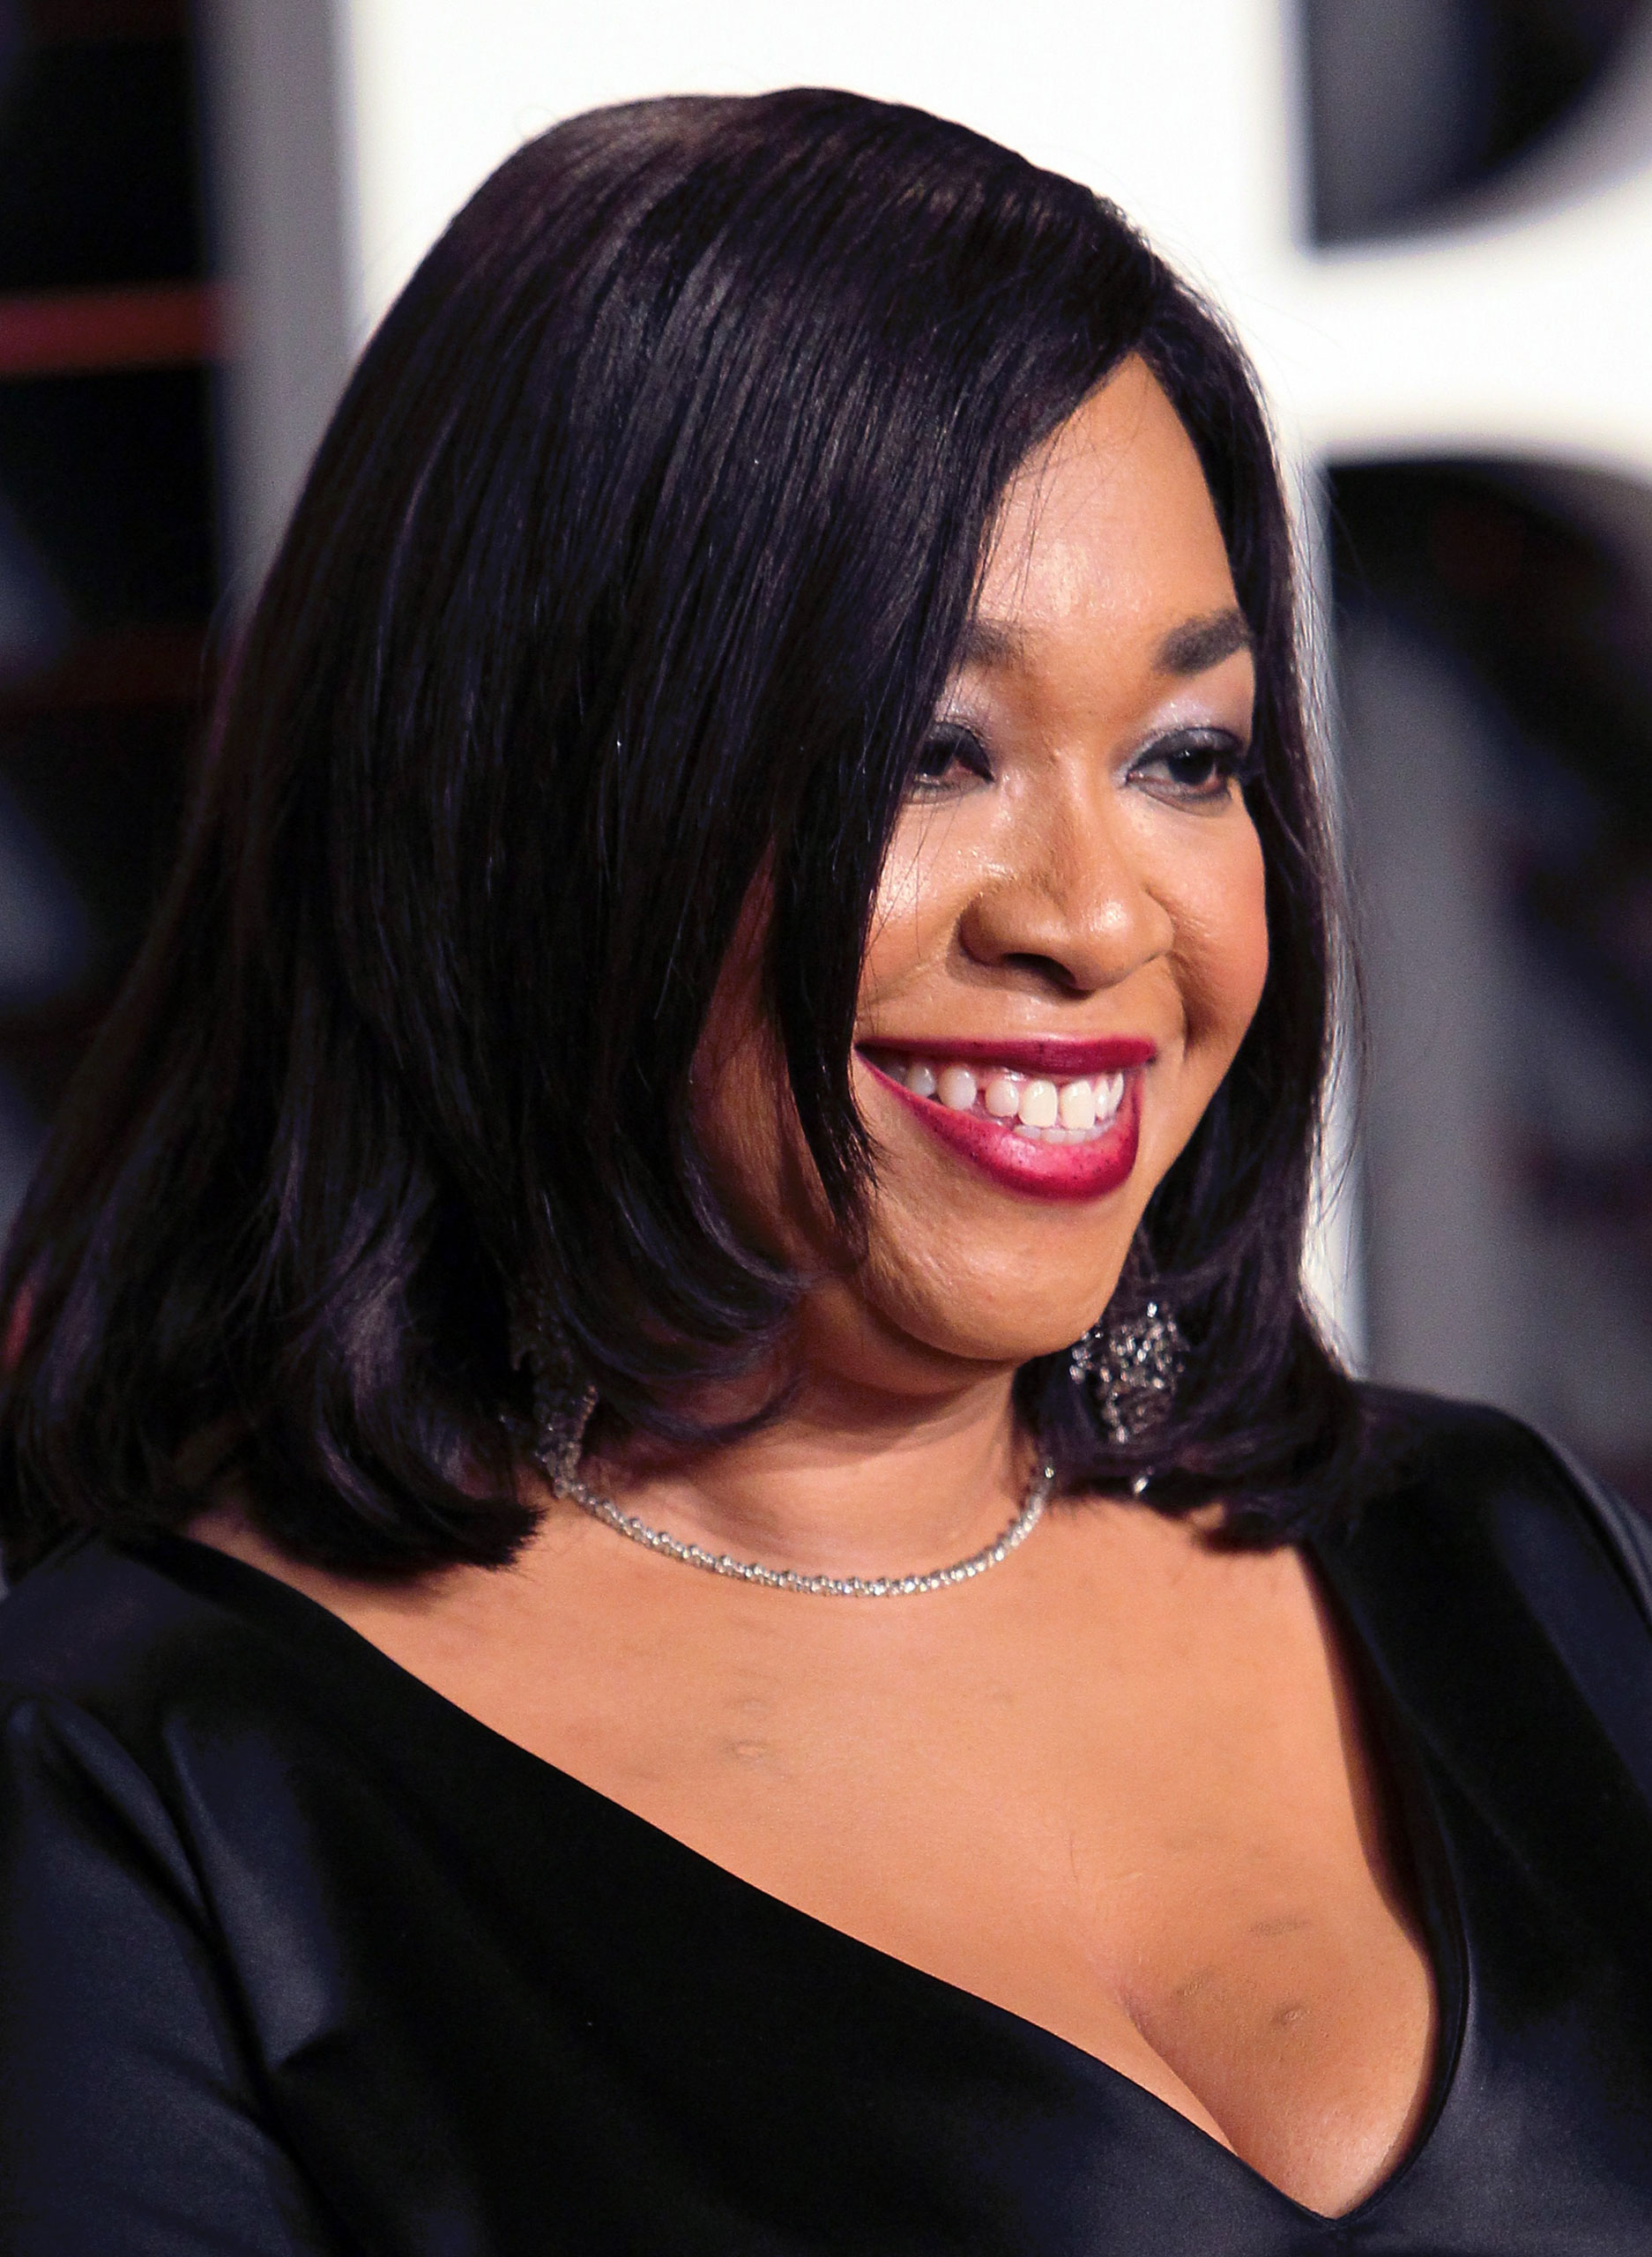 Shonda Rhimes attends the 2015 Vanity Fair Oscar Party hosted by Graydon Carter at the Wallis Annenberg Center for the Performing Arts on Feb. 22, 2015 in Beverly Hills, Calif.